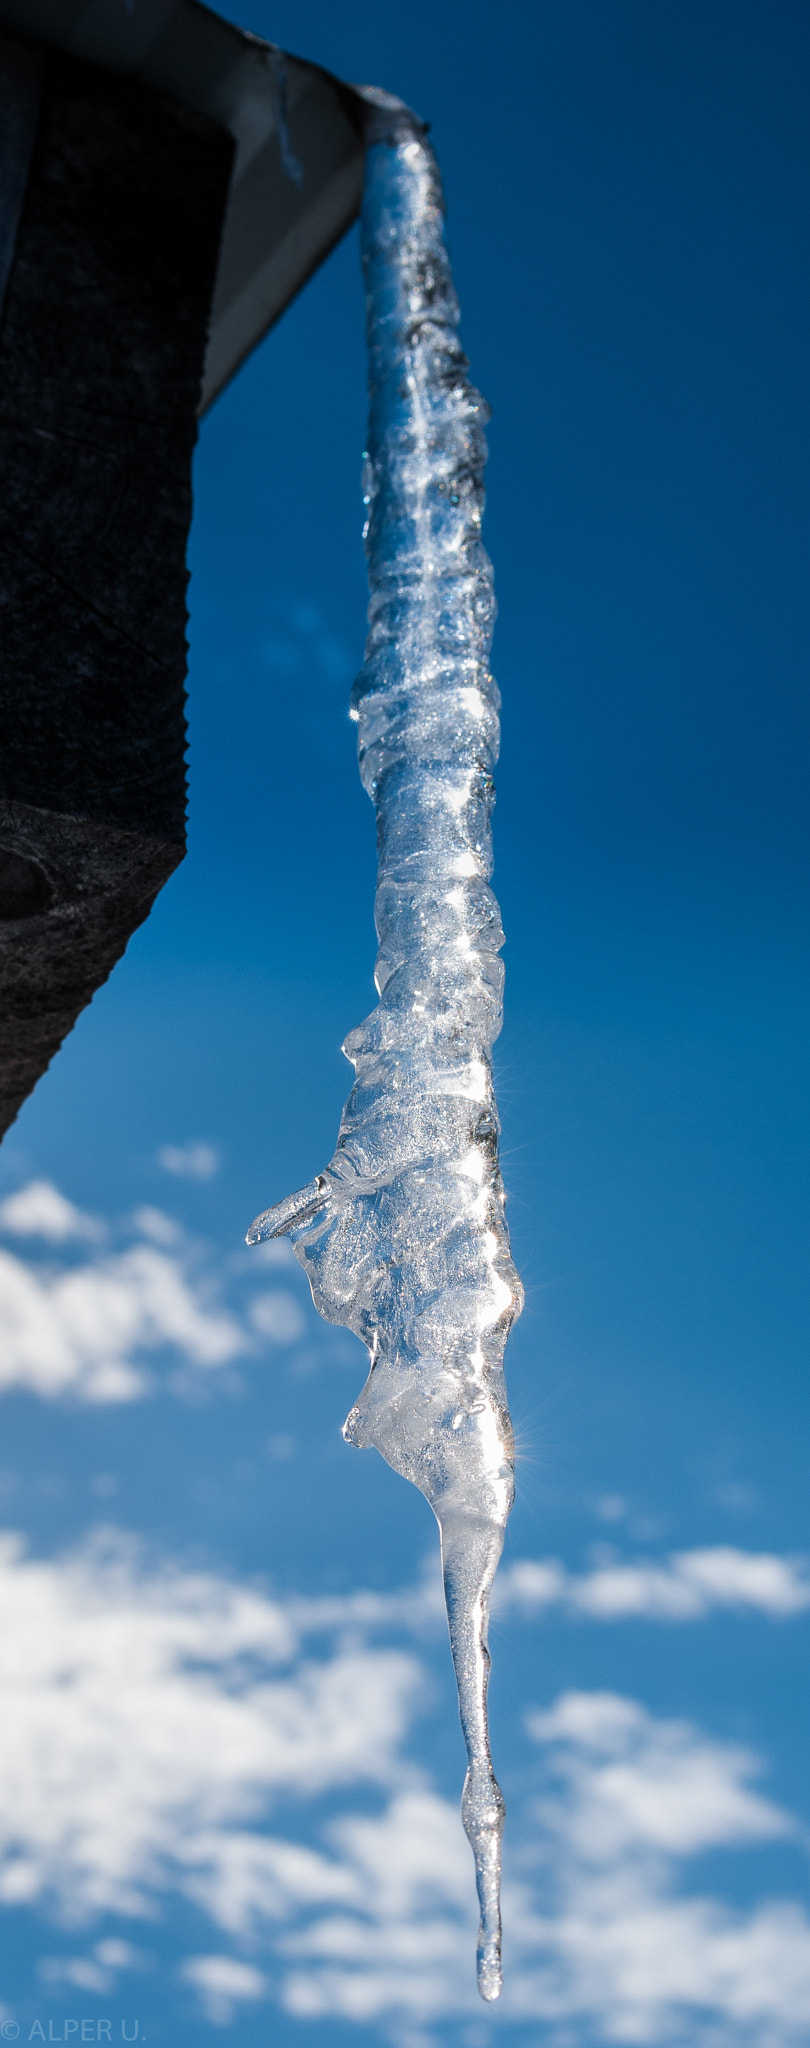 Nikon D80 sample photo. Shocked face on an icicle photography